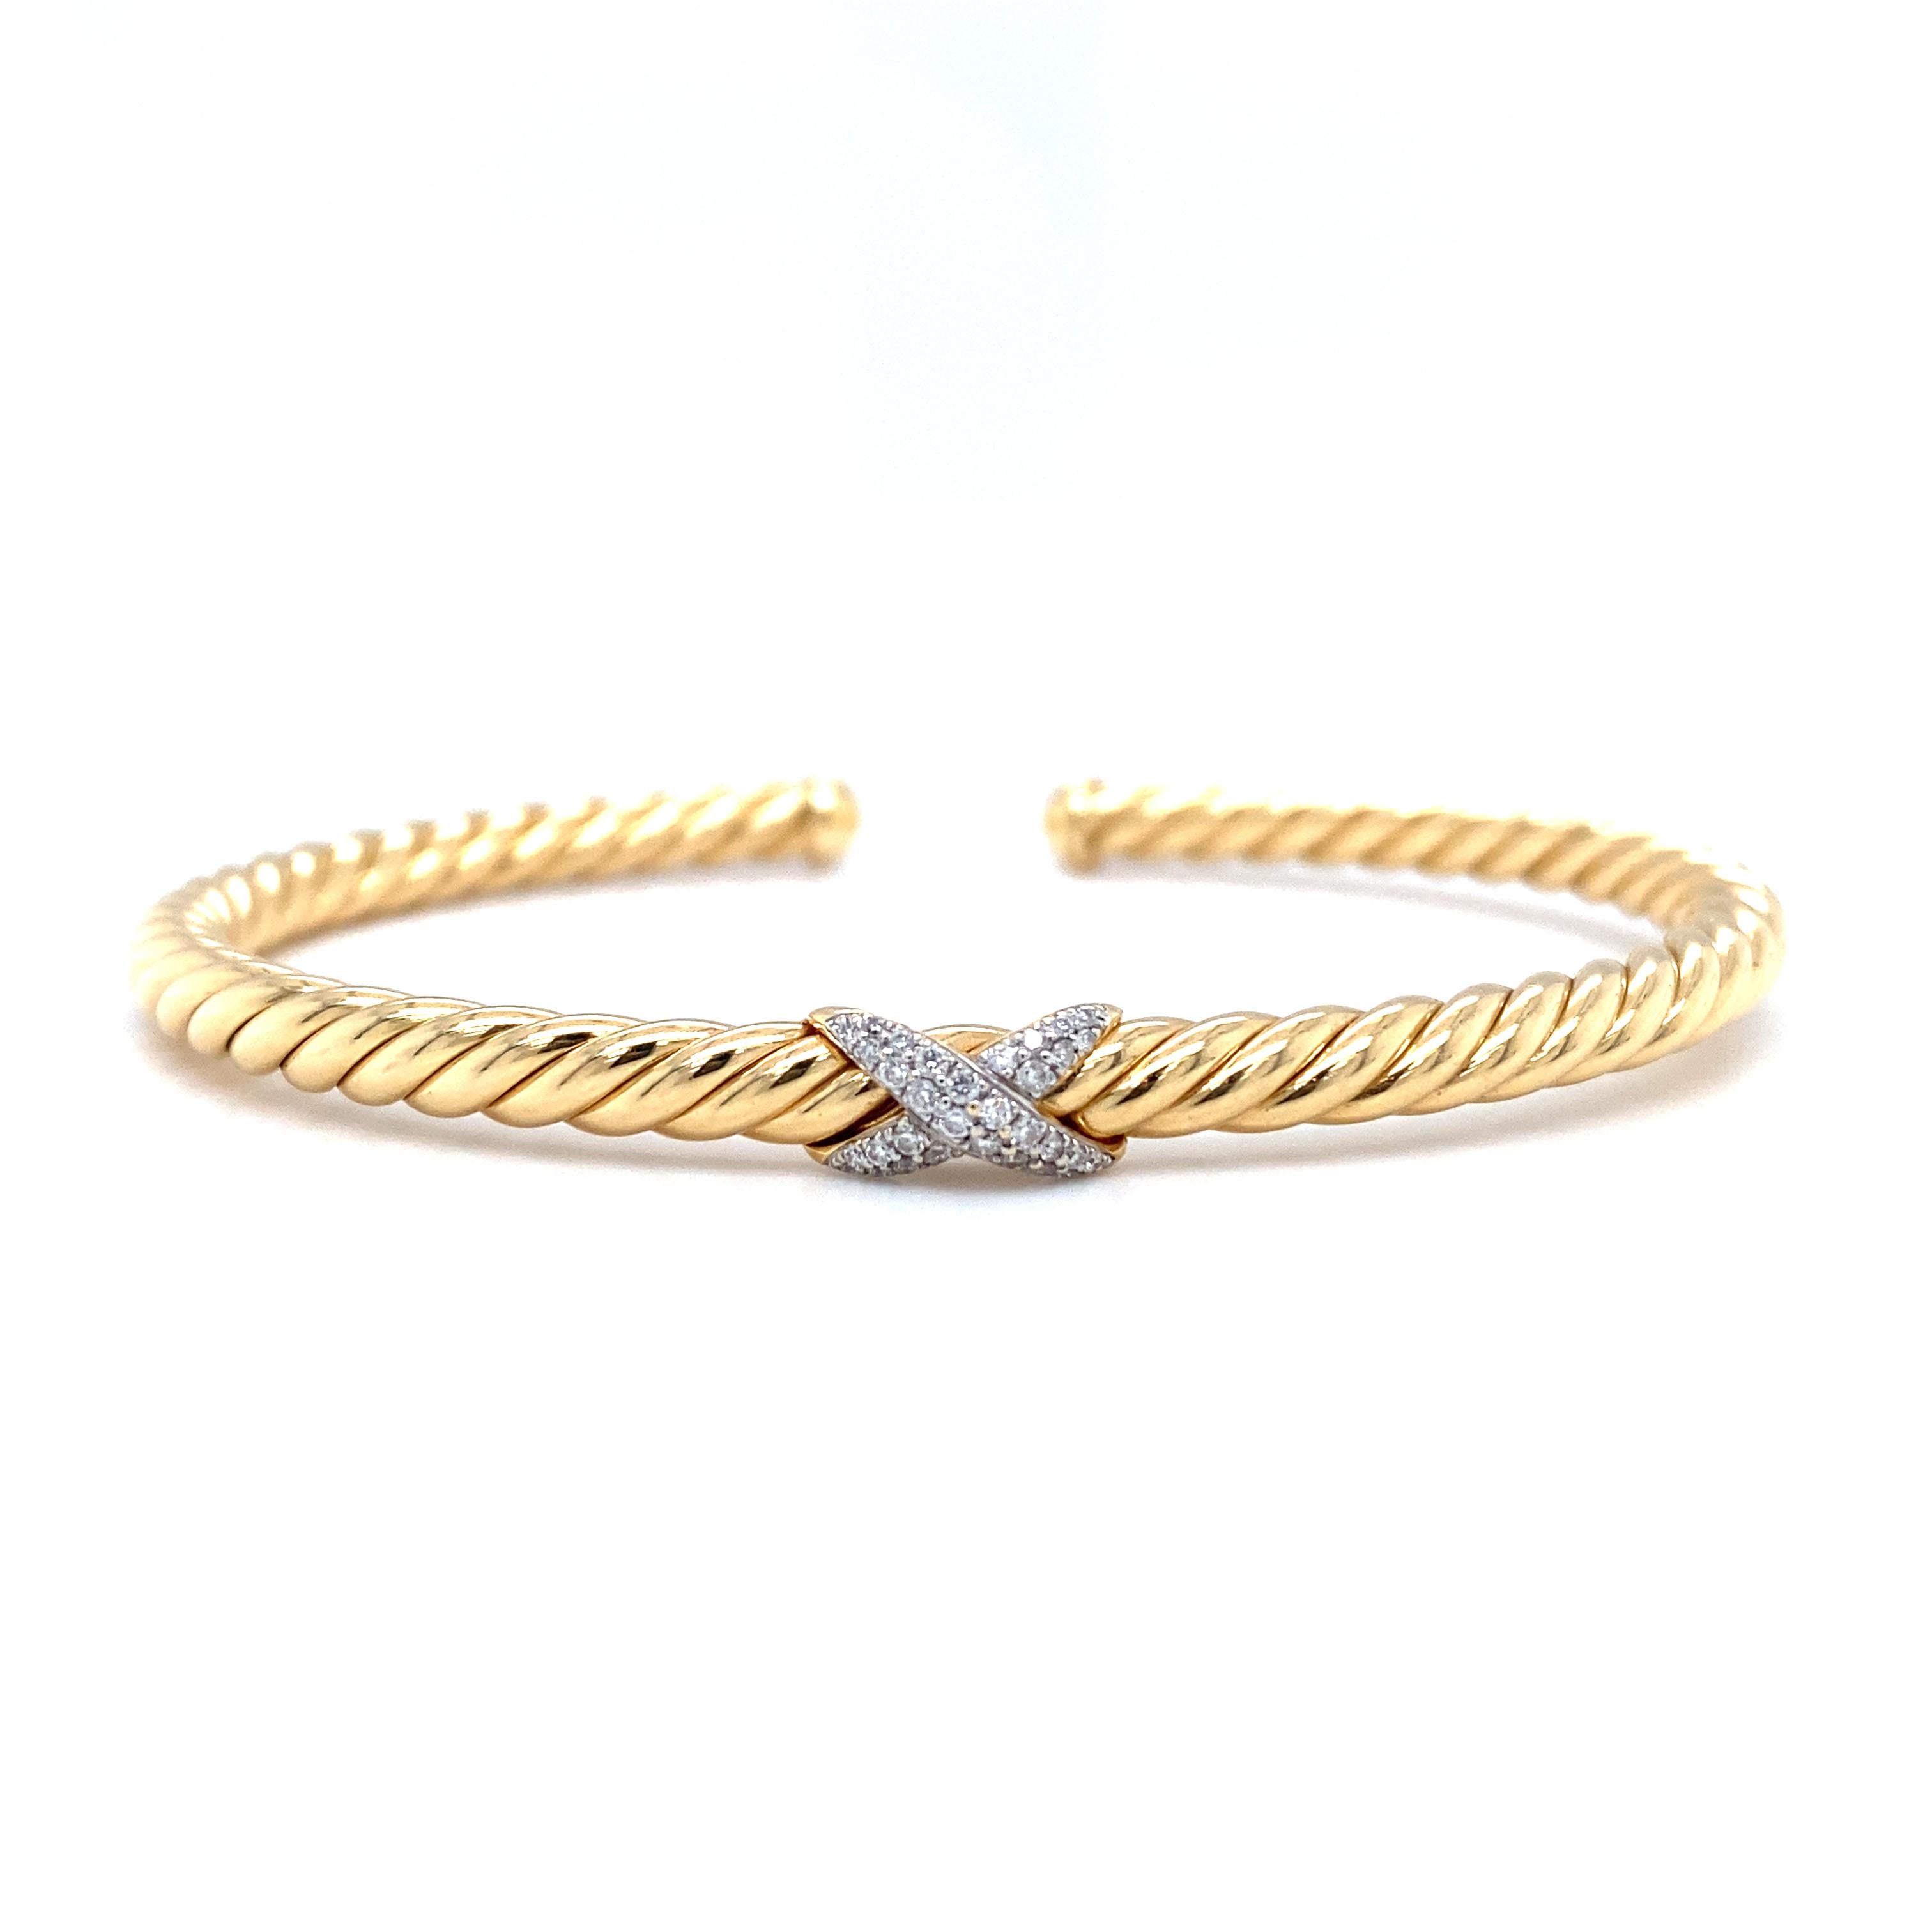 Item Details: This cuff bracelet by David Yurman features a trademark X design popularized by the designer, with a beautifully crafted twist motif. The bracelet is expertly made in 18 karat yellow gold, and features brilliant round diamonds.

This